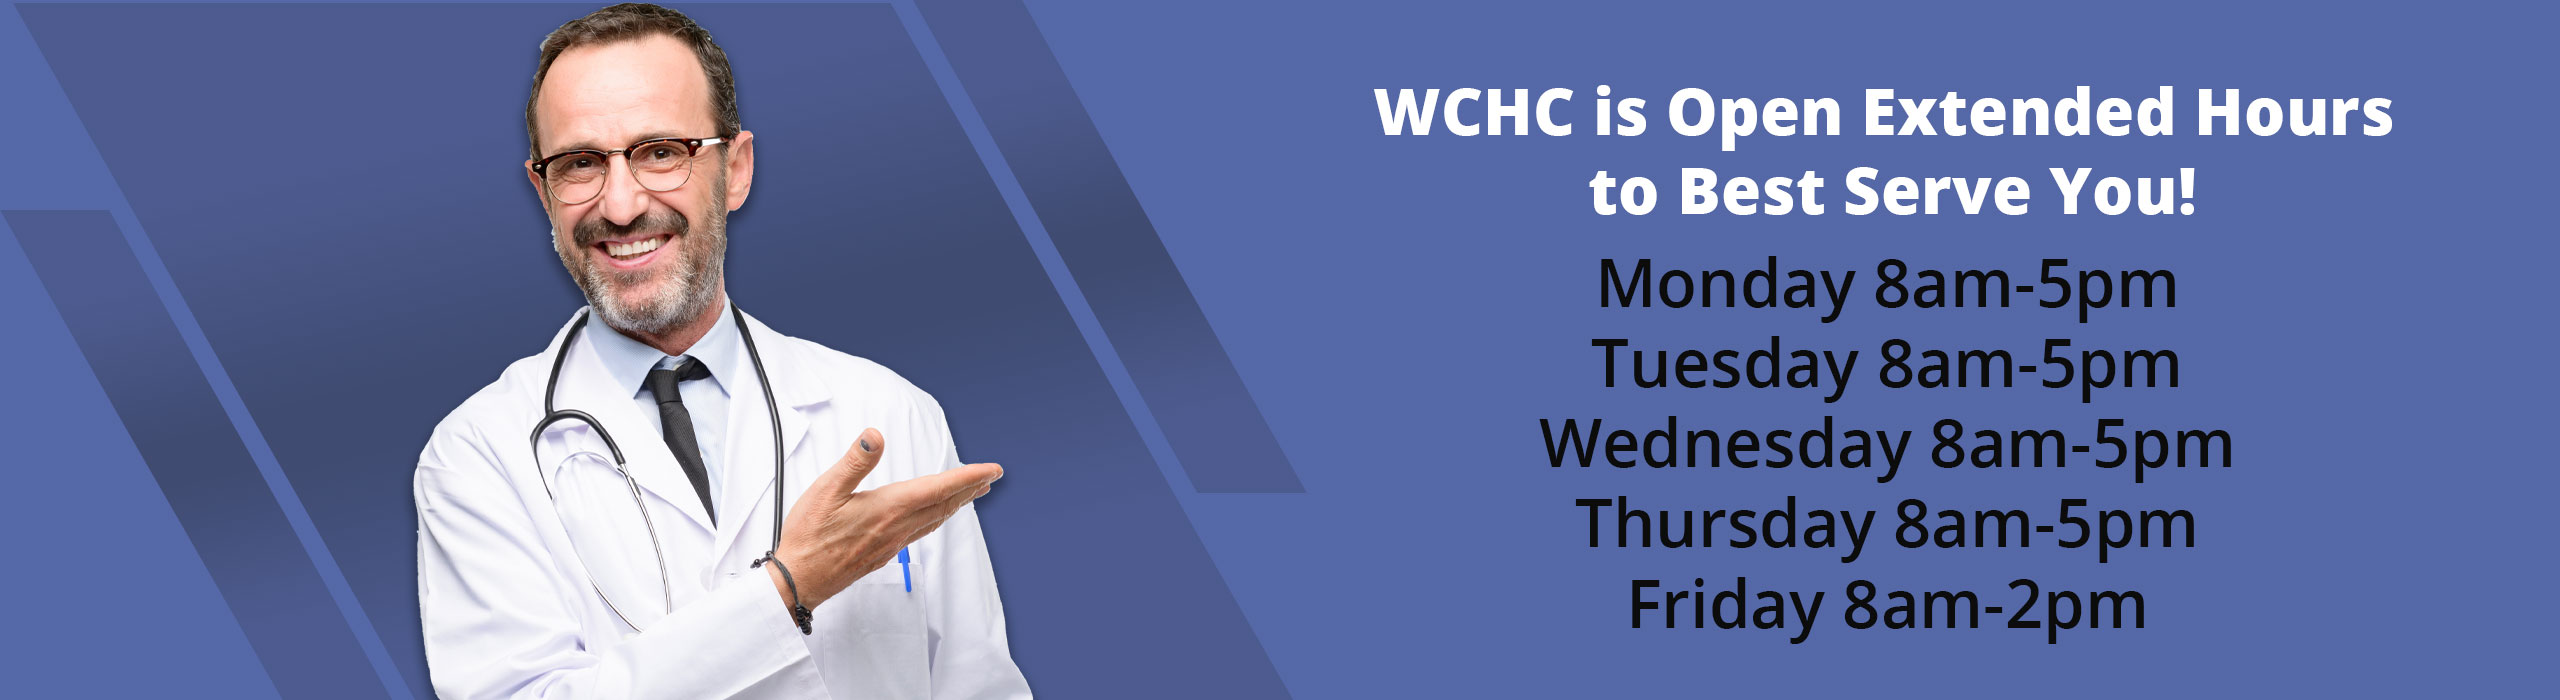 Banner picture of a male Physician smiling. Banner says:
WCHC is Open Extended Hours to Best Serve You!


Monday 8am-5pm
Tuesday 8am-5pm
Wednesday 8am-5pm
Thursday 8am-5pm
Friday 8am-2pm